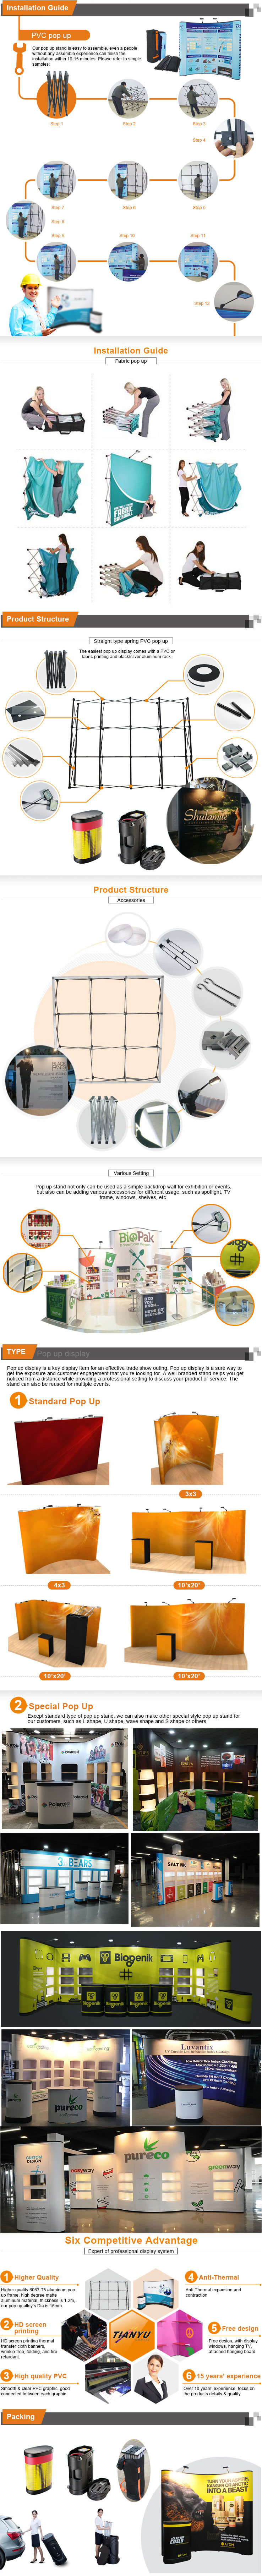 Exhibition Booth Platform Design 3*3 Size Trade Show Stand Easy Installation Pop up Stall